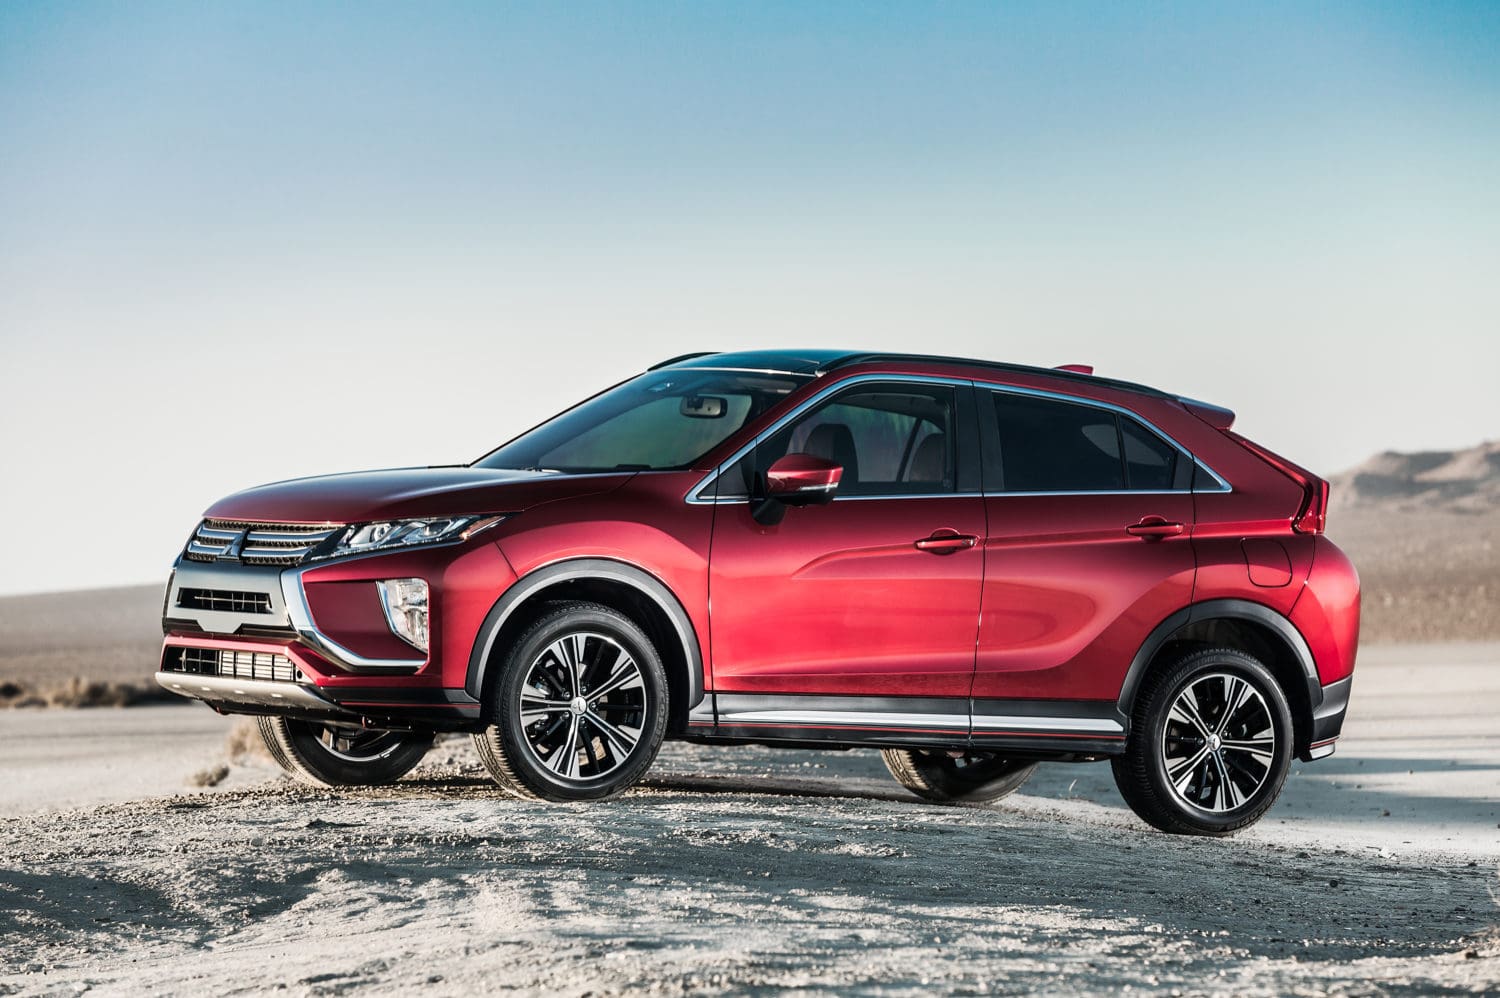 2019 Mitsubishi Eclipse Cross An Unexpected Surprise - Focus Daily News